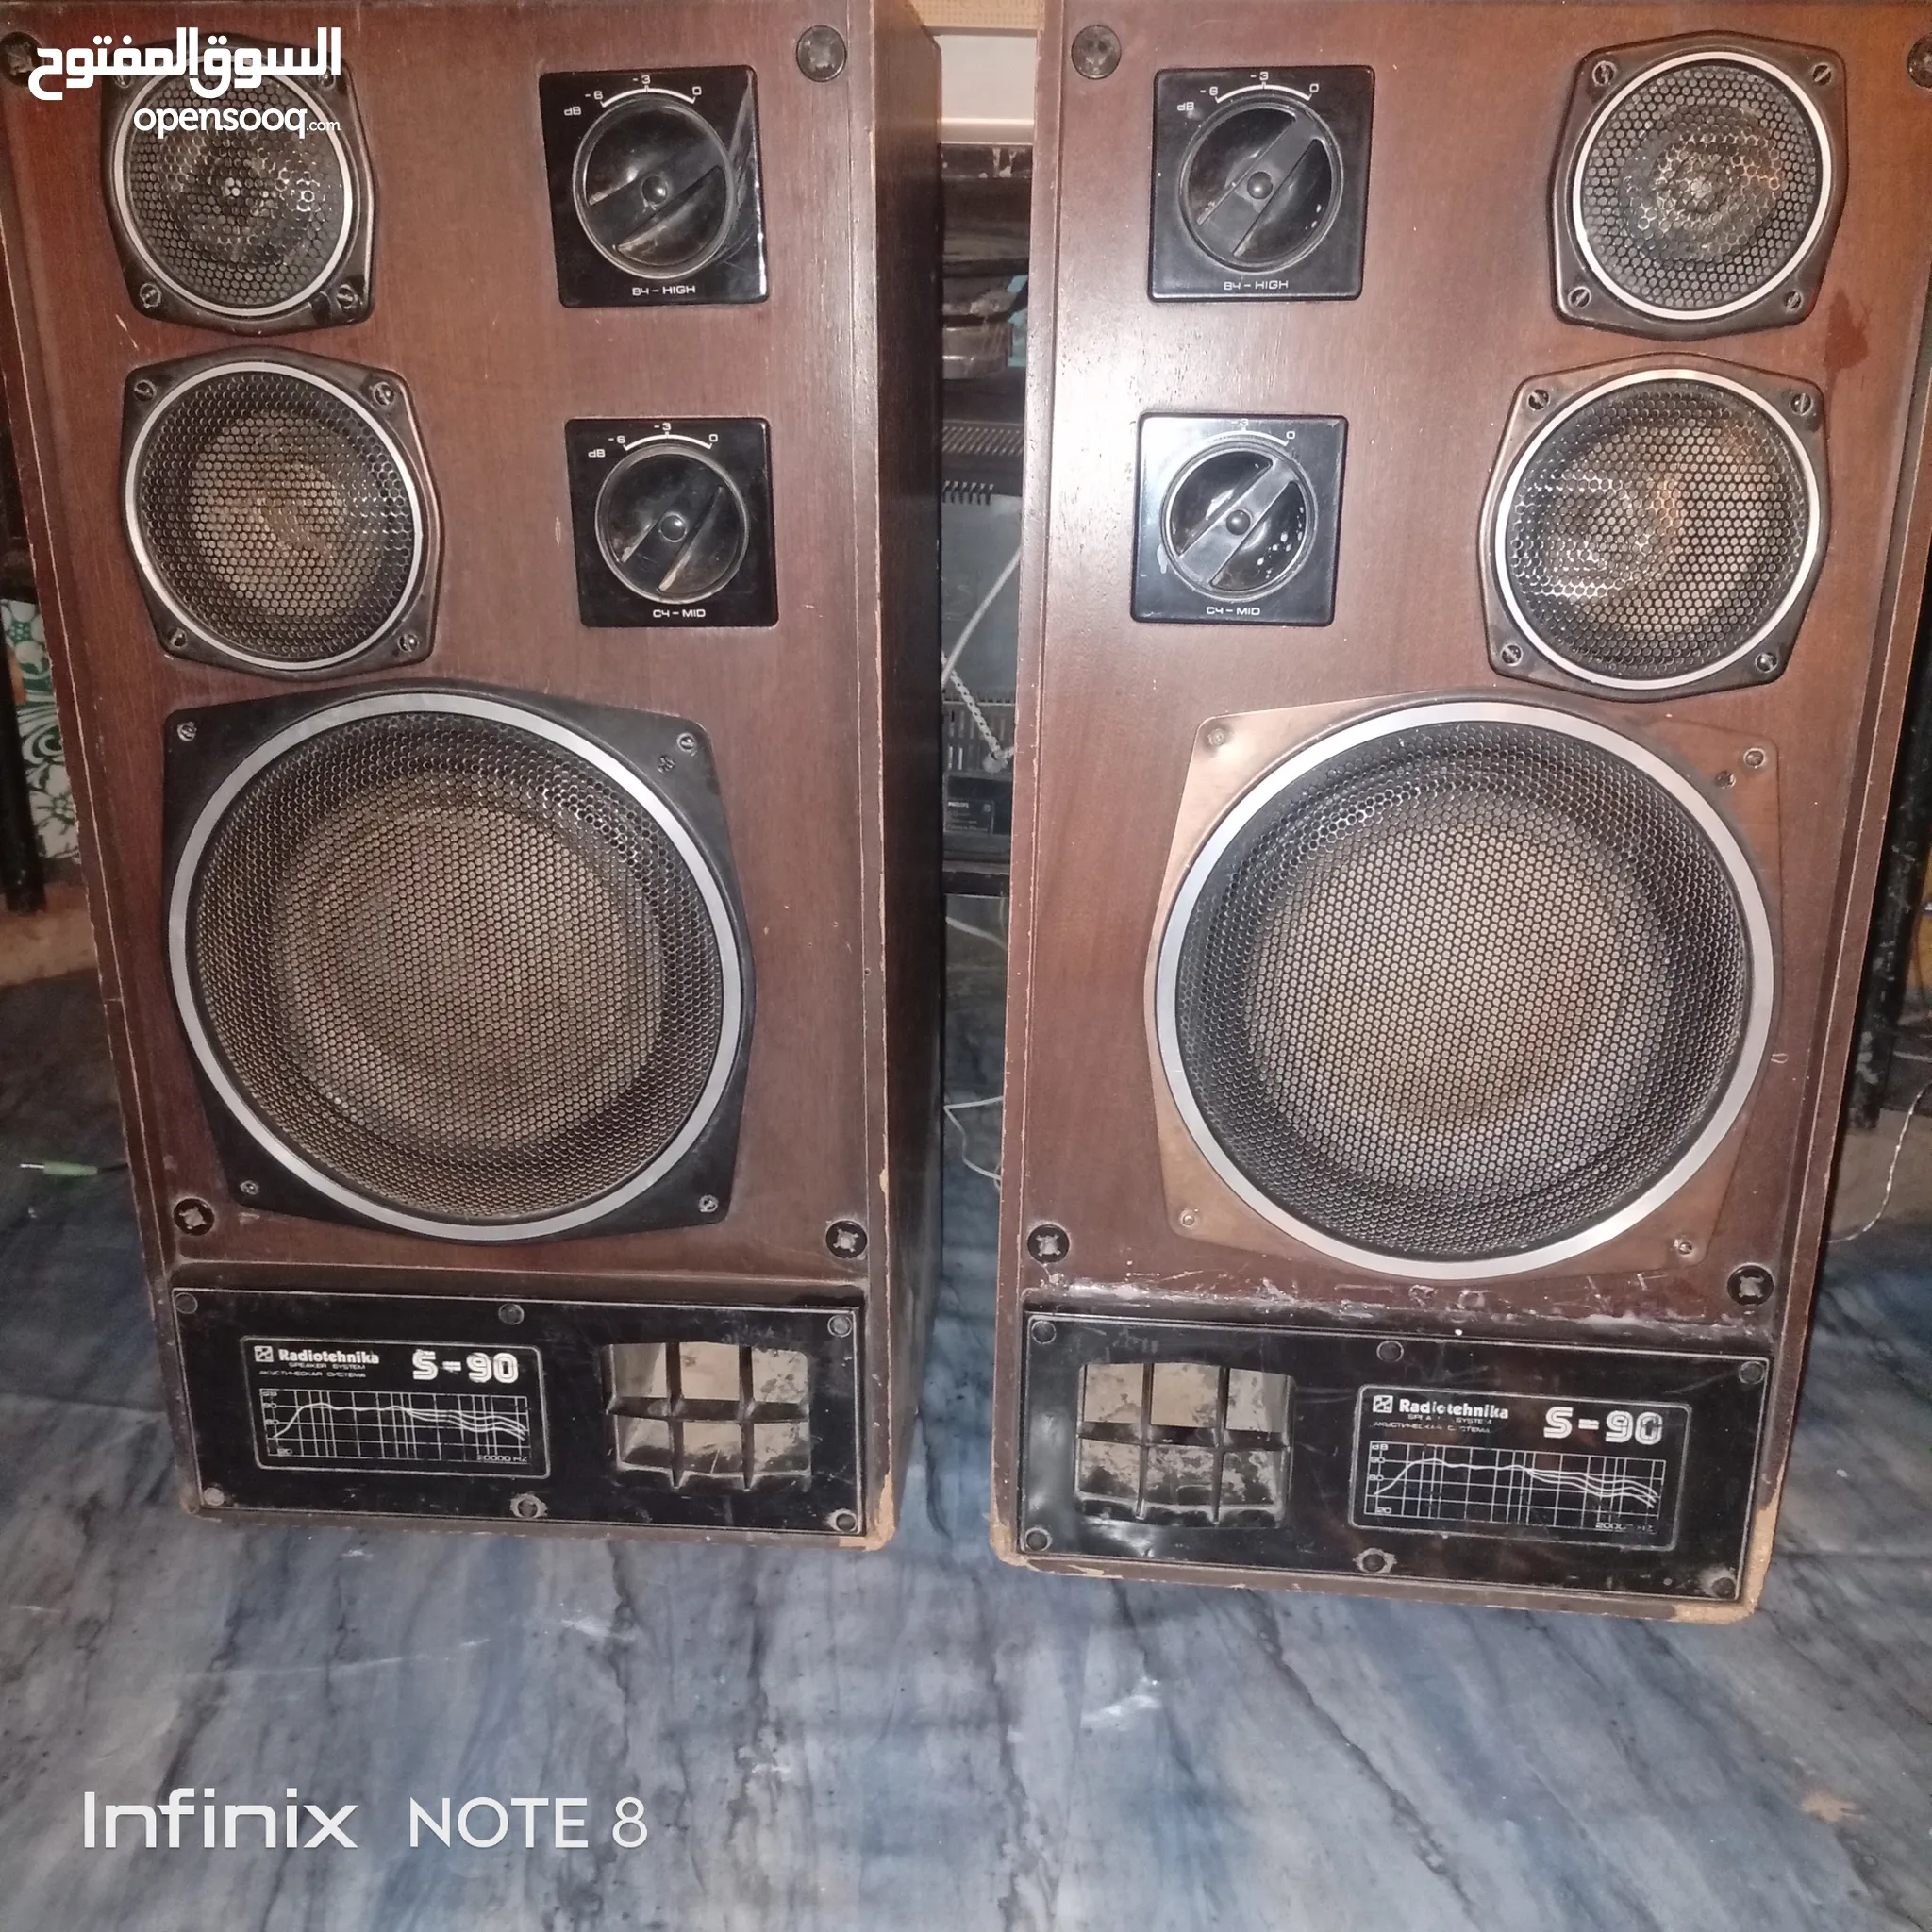 Speakers for Sale in Sudan : Best Prices | OpenSooq